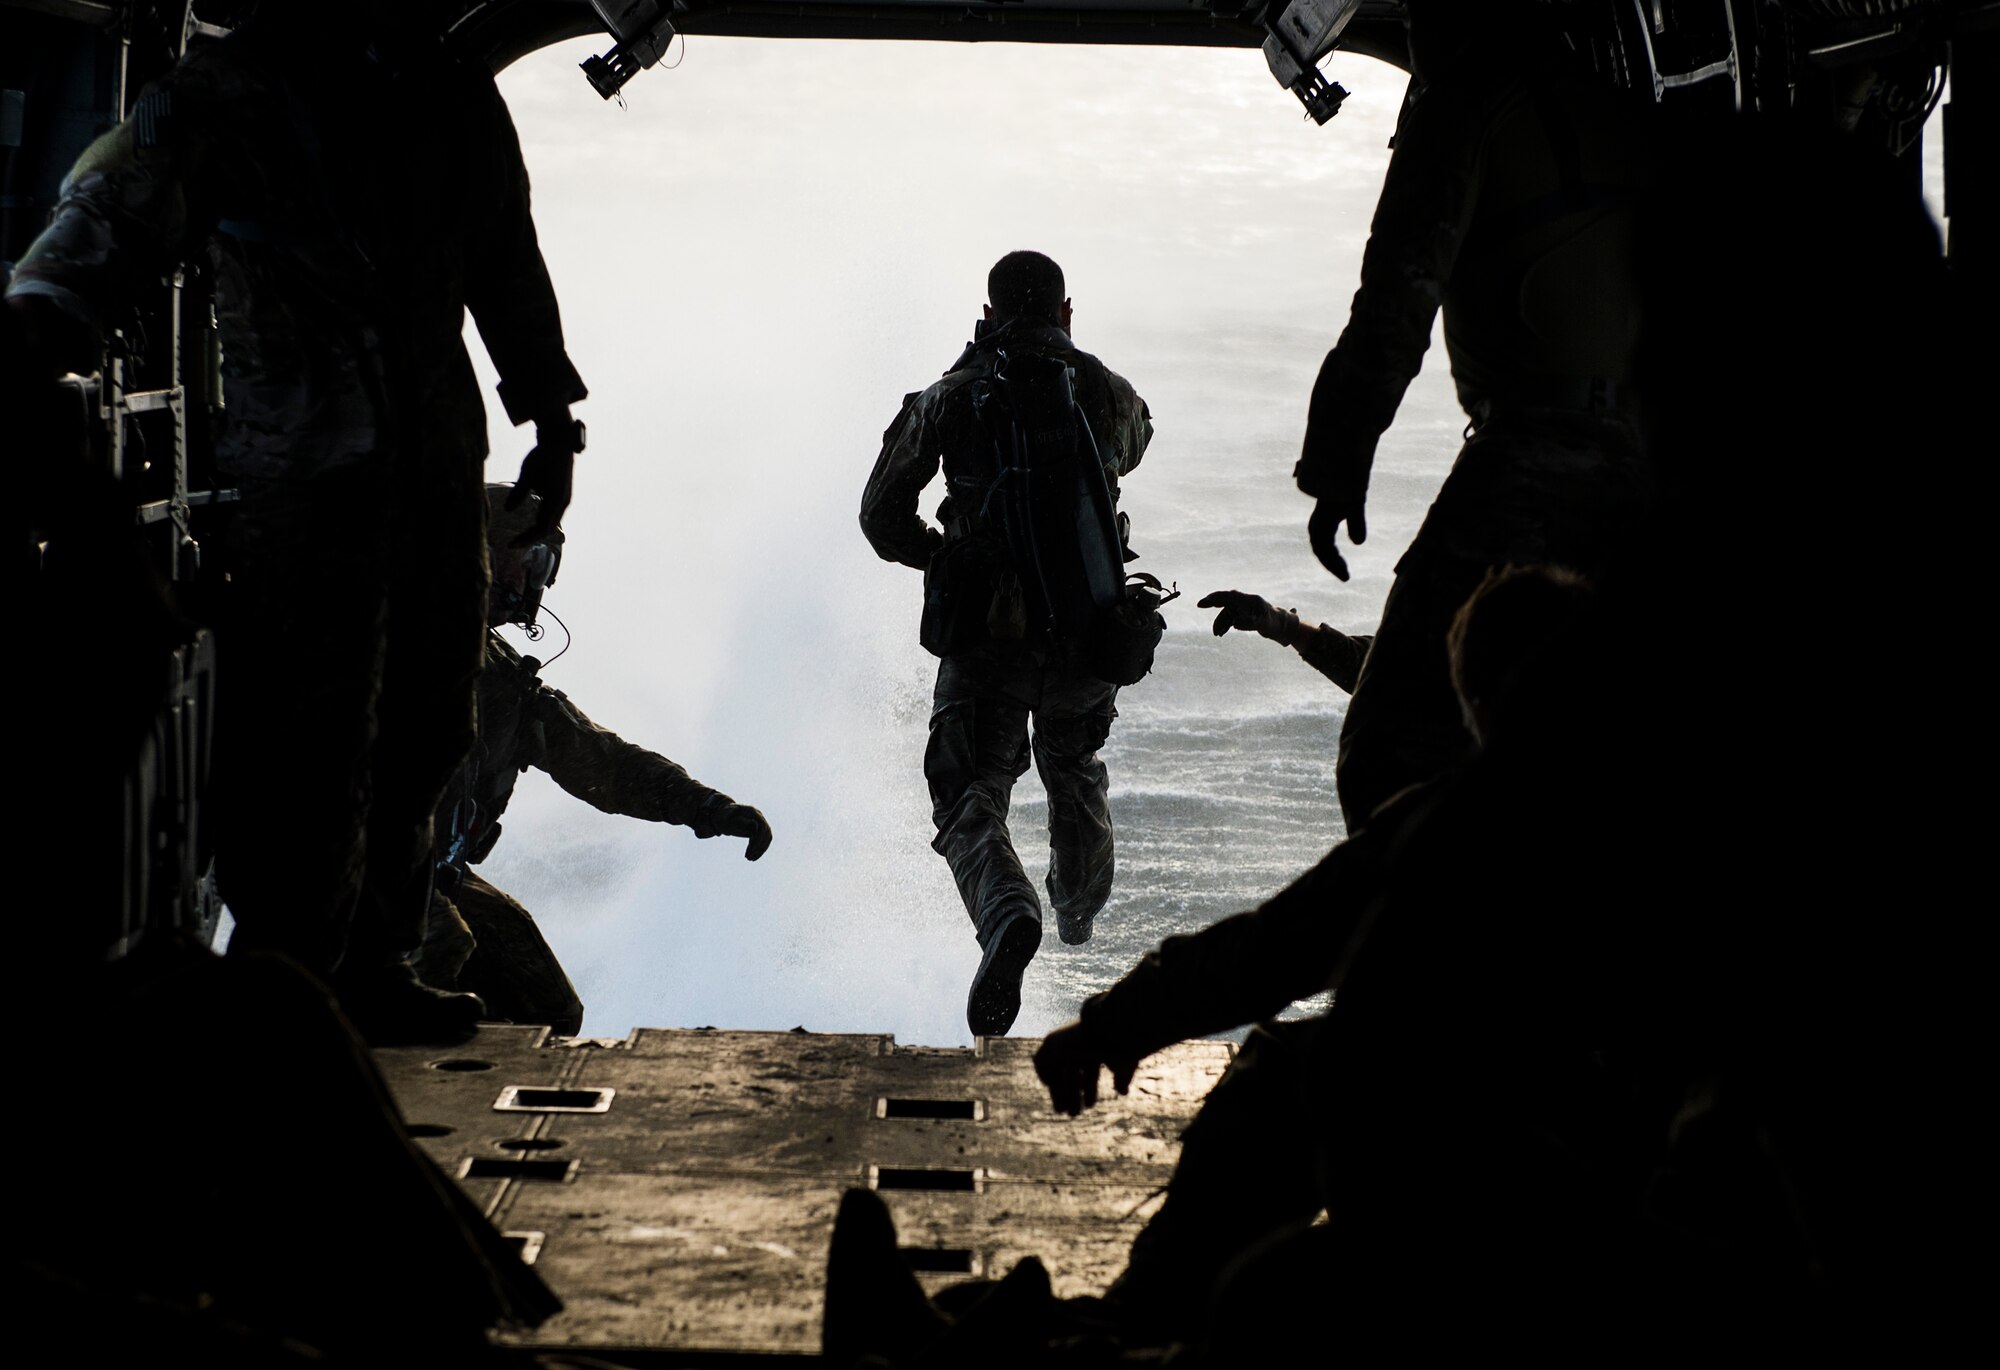 A member of the Chilean navy jumps from a CH-47 Chinook as part of Emerald Warrior at Hurlburt Field, Fla., April 21, 2015. Emerald Warrior is the Department of Defense's only irregular warfare exercise, allowing joint and combined partners to train together and prepare for real-world contingency operations. (U.S. Air Force photo by Staff Sgt. Kenneth W. Norman/Released)